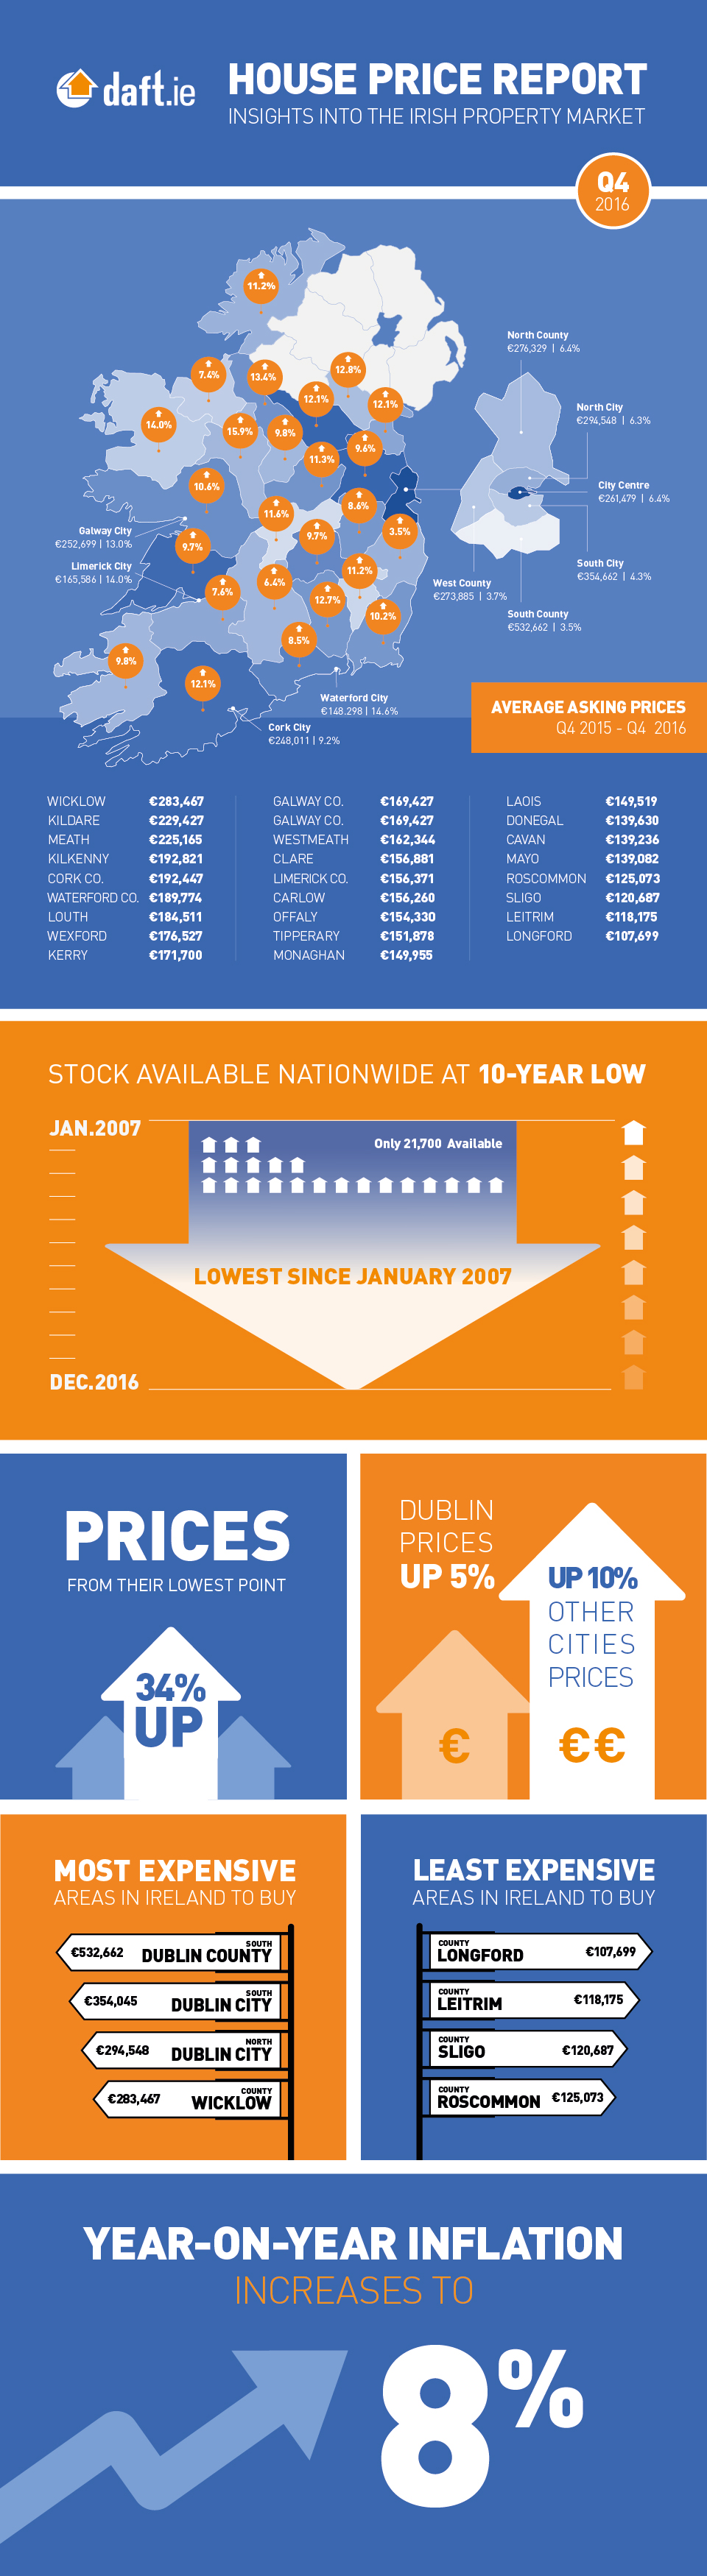 Daft.ie House Price Report: Q4 2016 Infographic